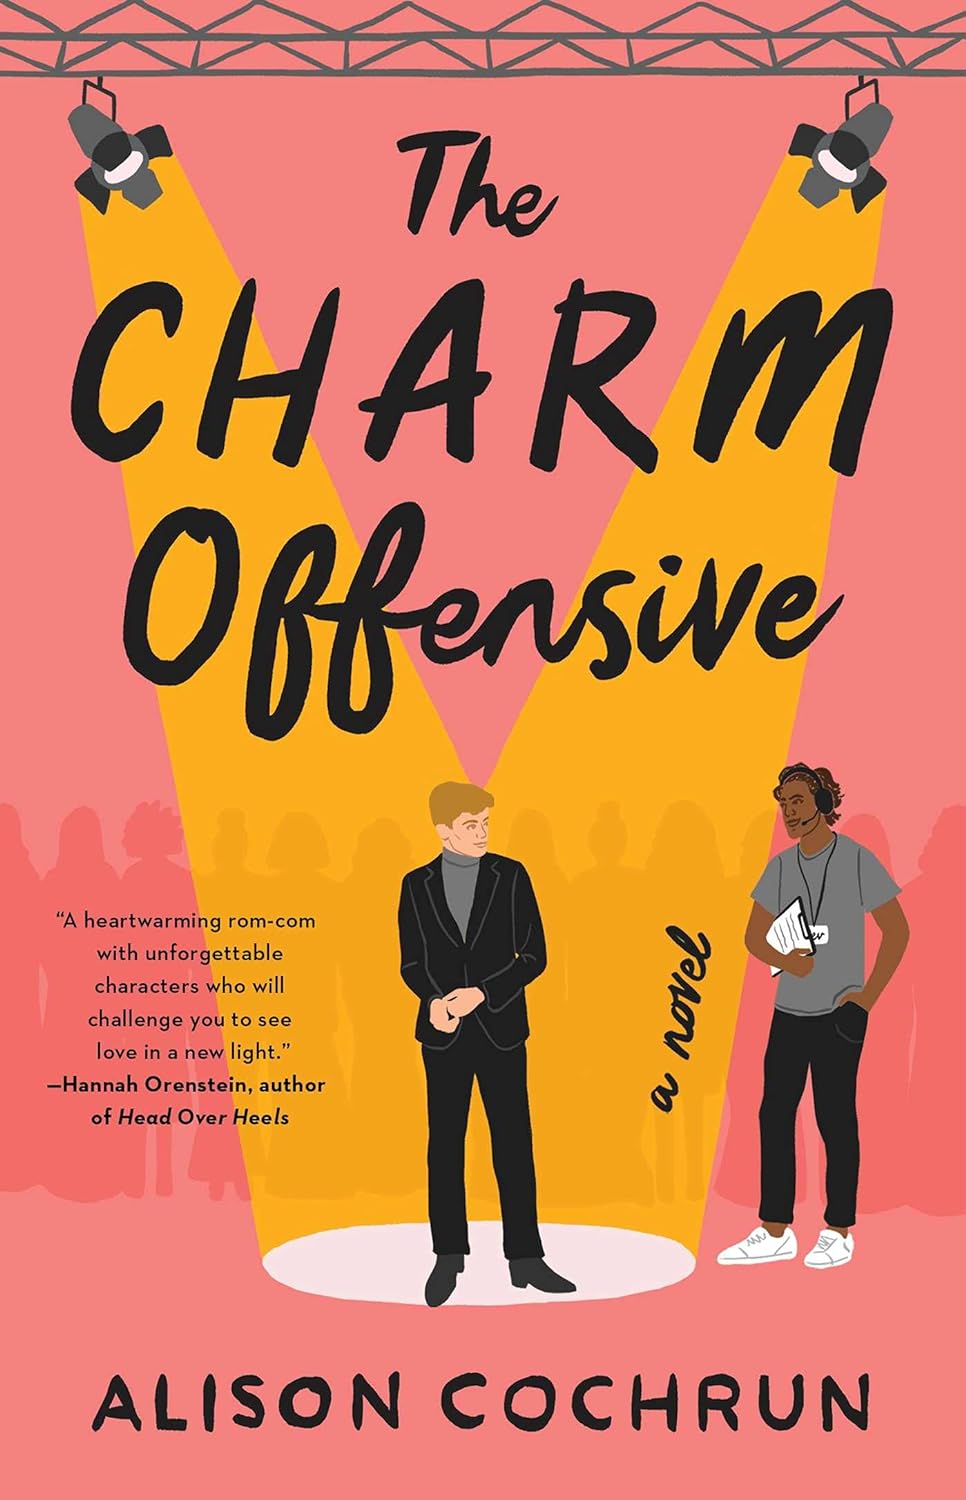 The book cover for The Charm Offensive shows a white man in a suit stood centre stage with a spotlight shining down on him. To the right of the stage is a brown man dressed in plain clothes and wearing a headset. Behind them is the outline of a row of women.